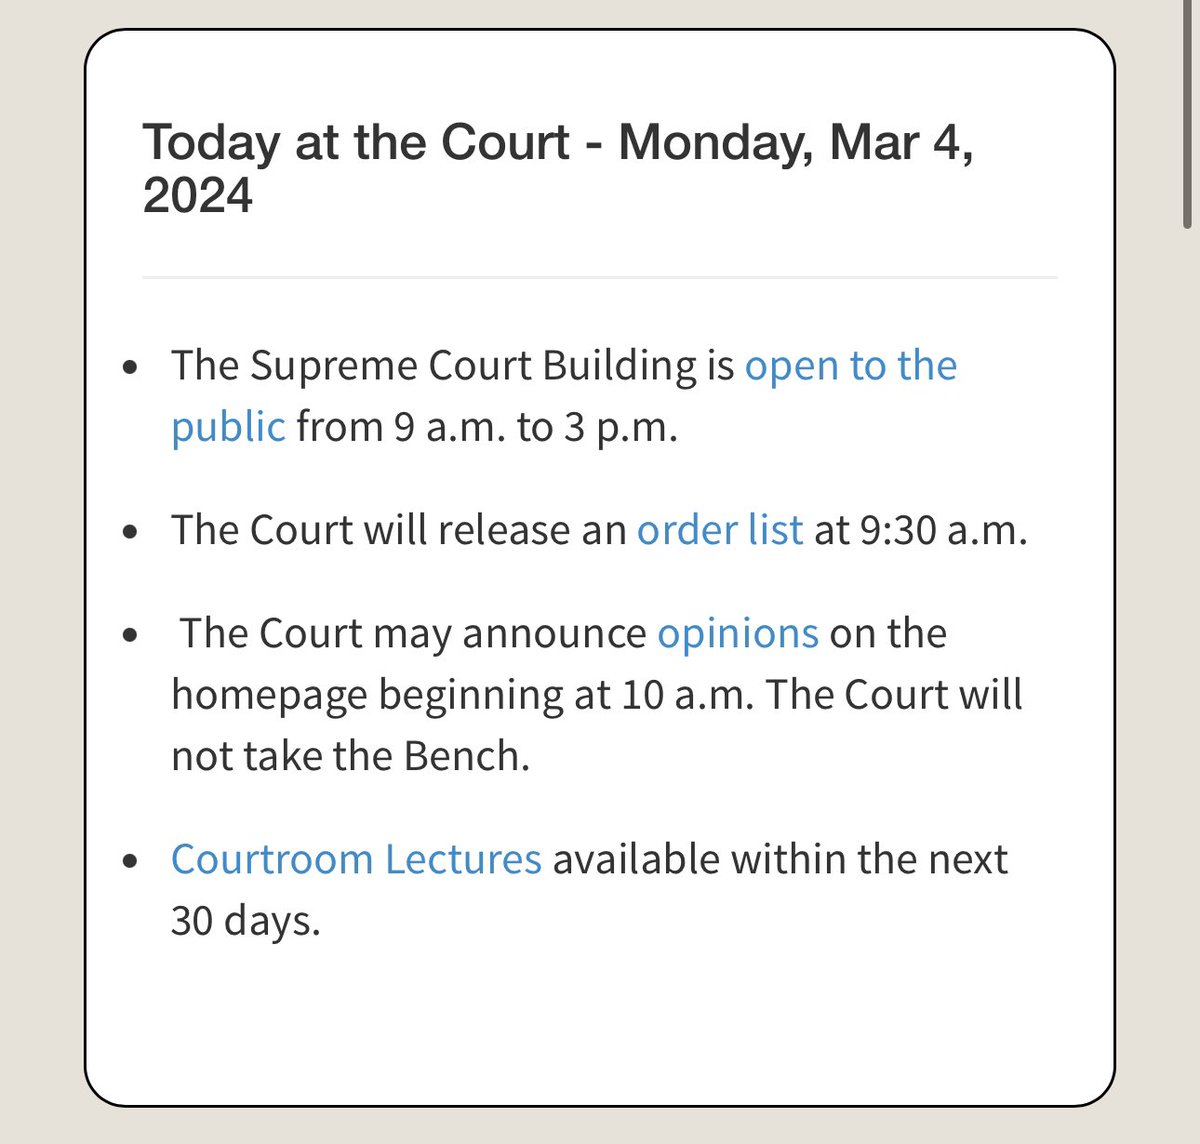 #SCOTUS just updated its website to flag that it “may announce opinions” Monday at 10 ET. It’s *really* unusual for the Court to give such little notice—or, outside of when things were closed for COVID, to not take the bench. IOW, Colorado ruling is very likely coming tomorrow.